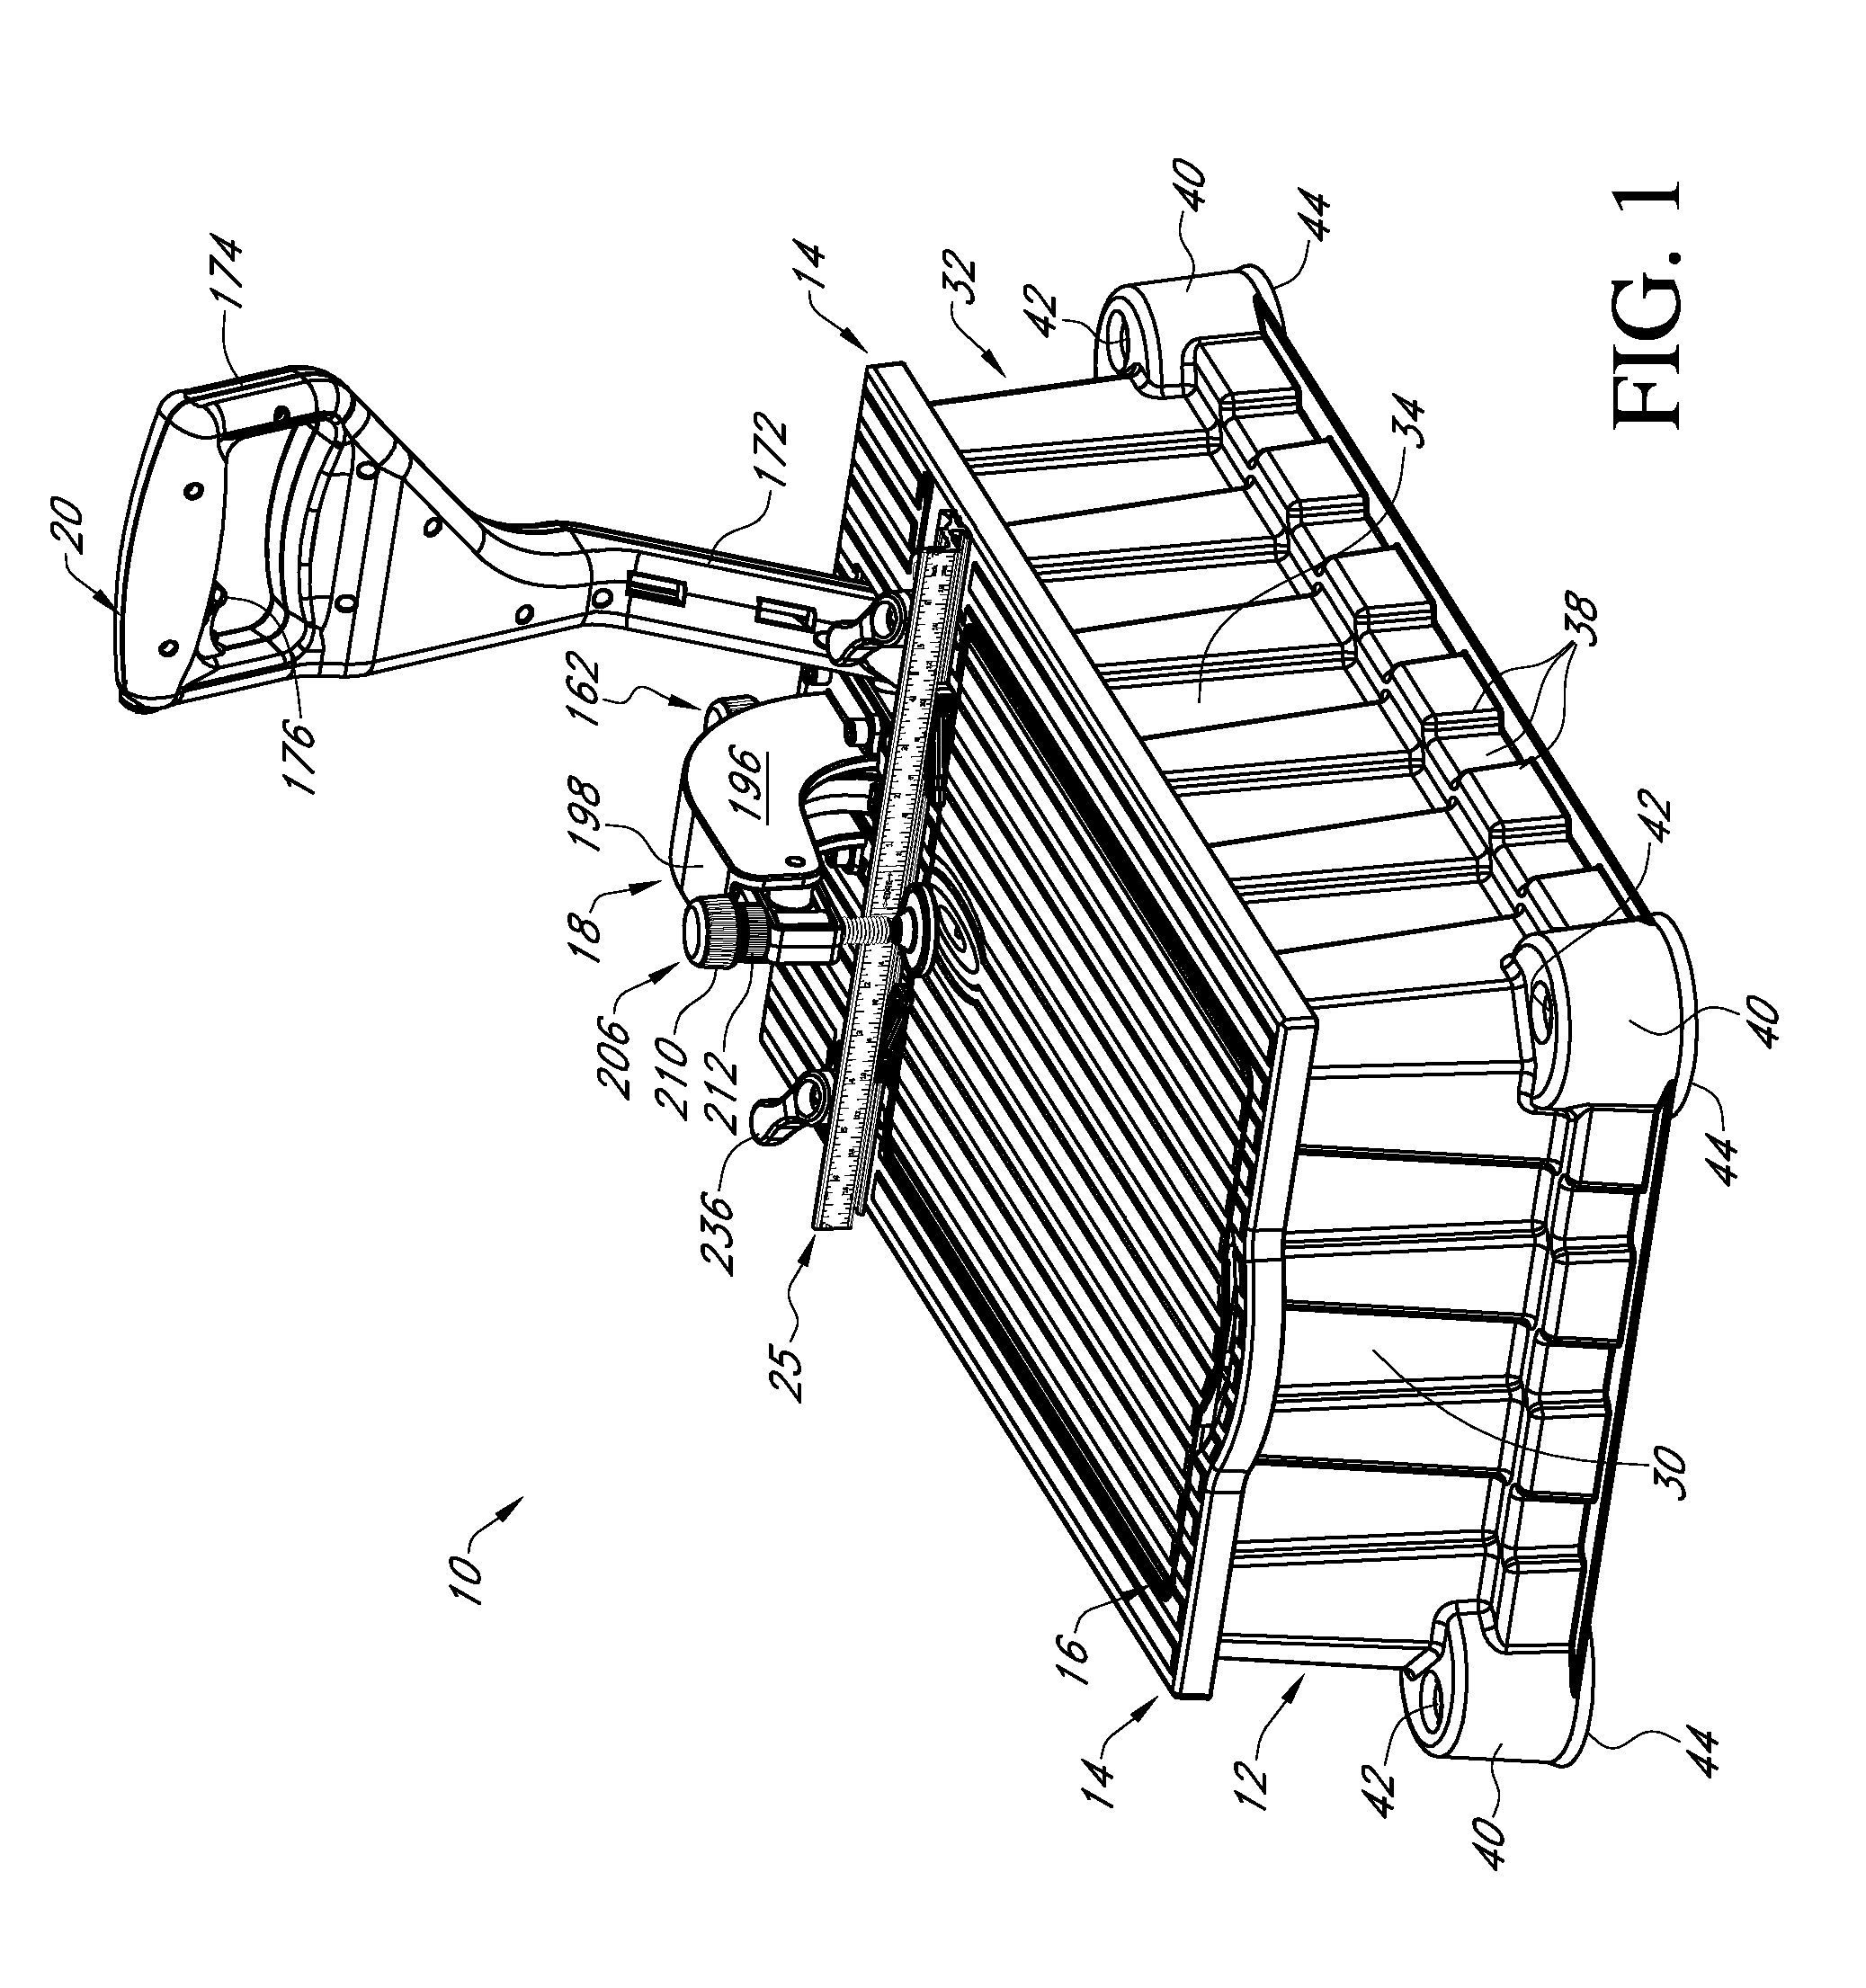 Cam lock fence system and method of use